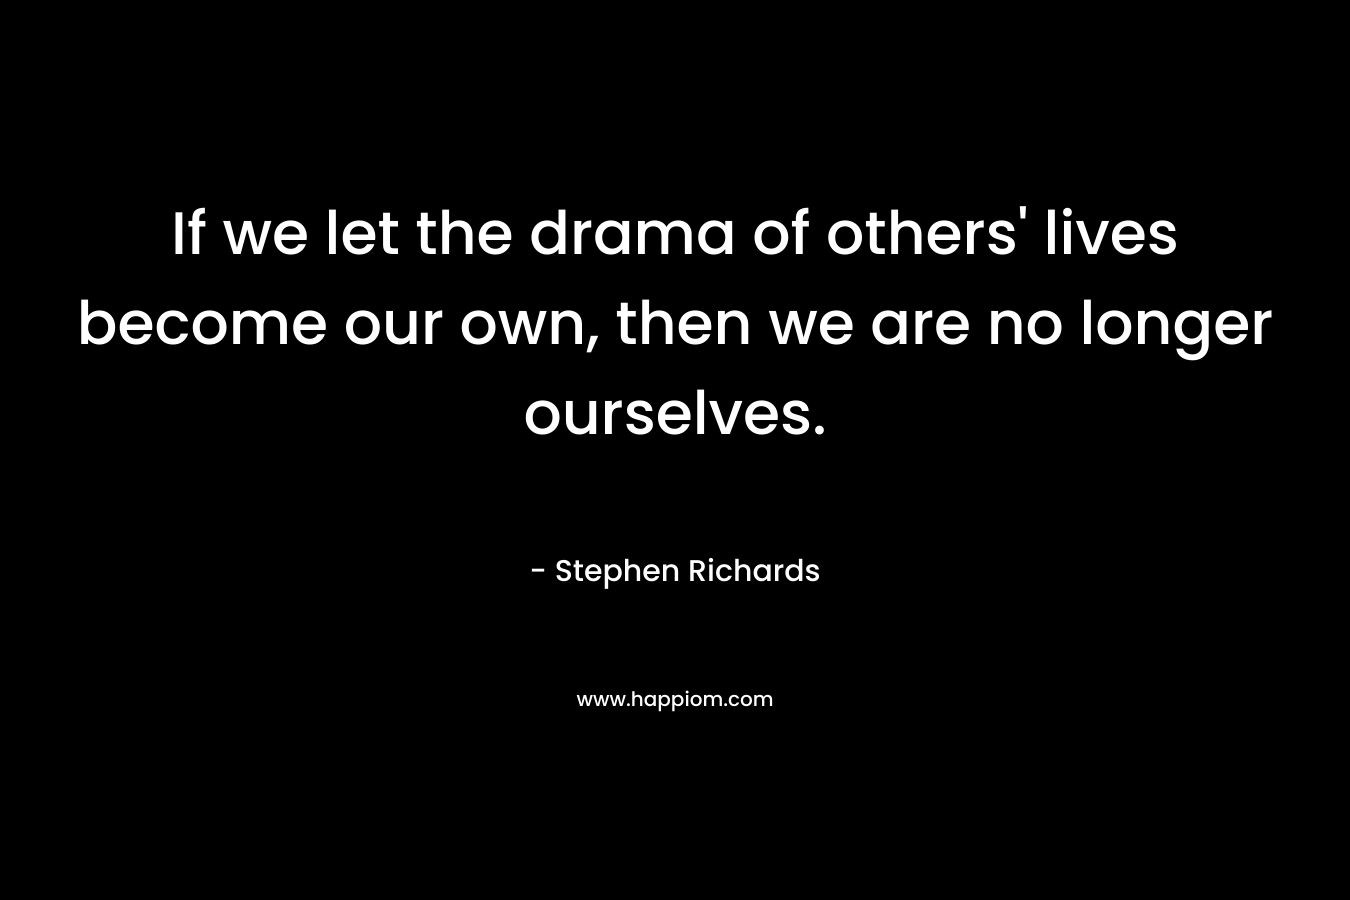 If we let the drama of others' lives become our own, then we are no longer ourselves.